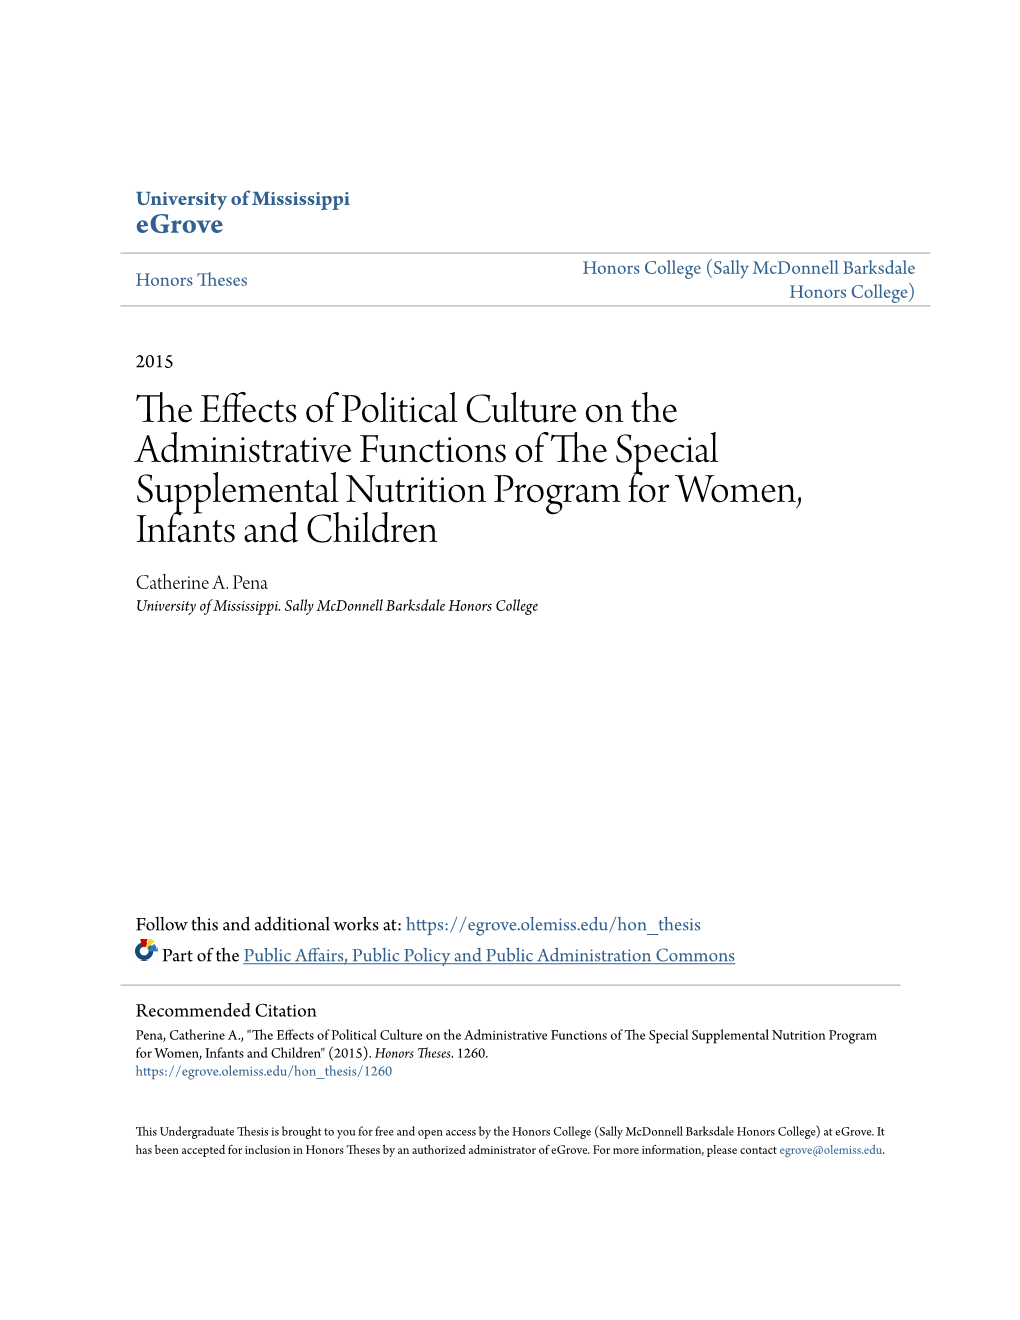 The Effects of Political Culture on the Administrative Functions of the Pes Cial Supplemental Nutrition Program for Women, Infants and Children" (2015)